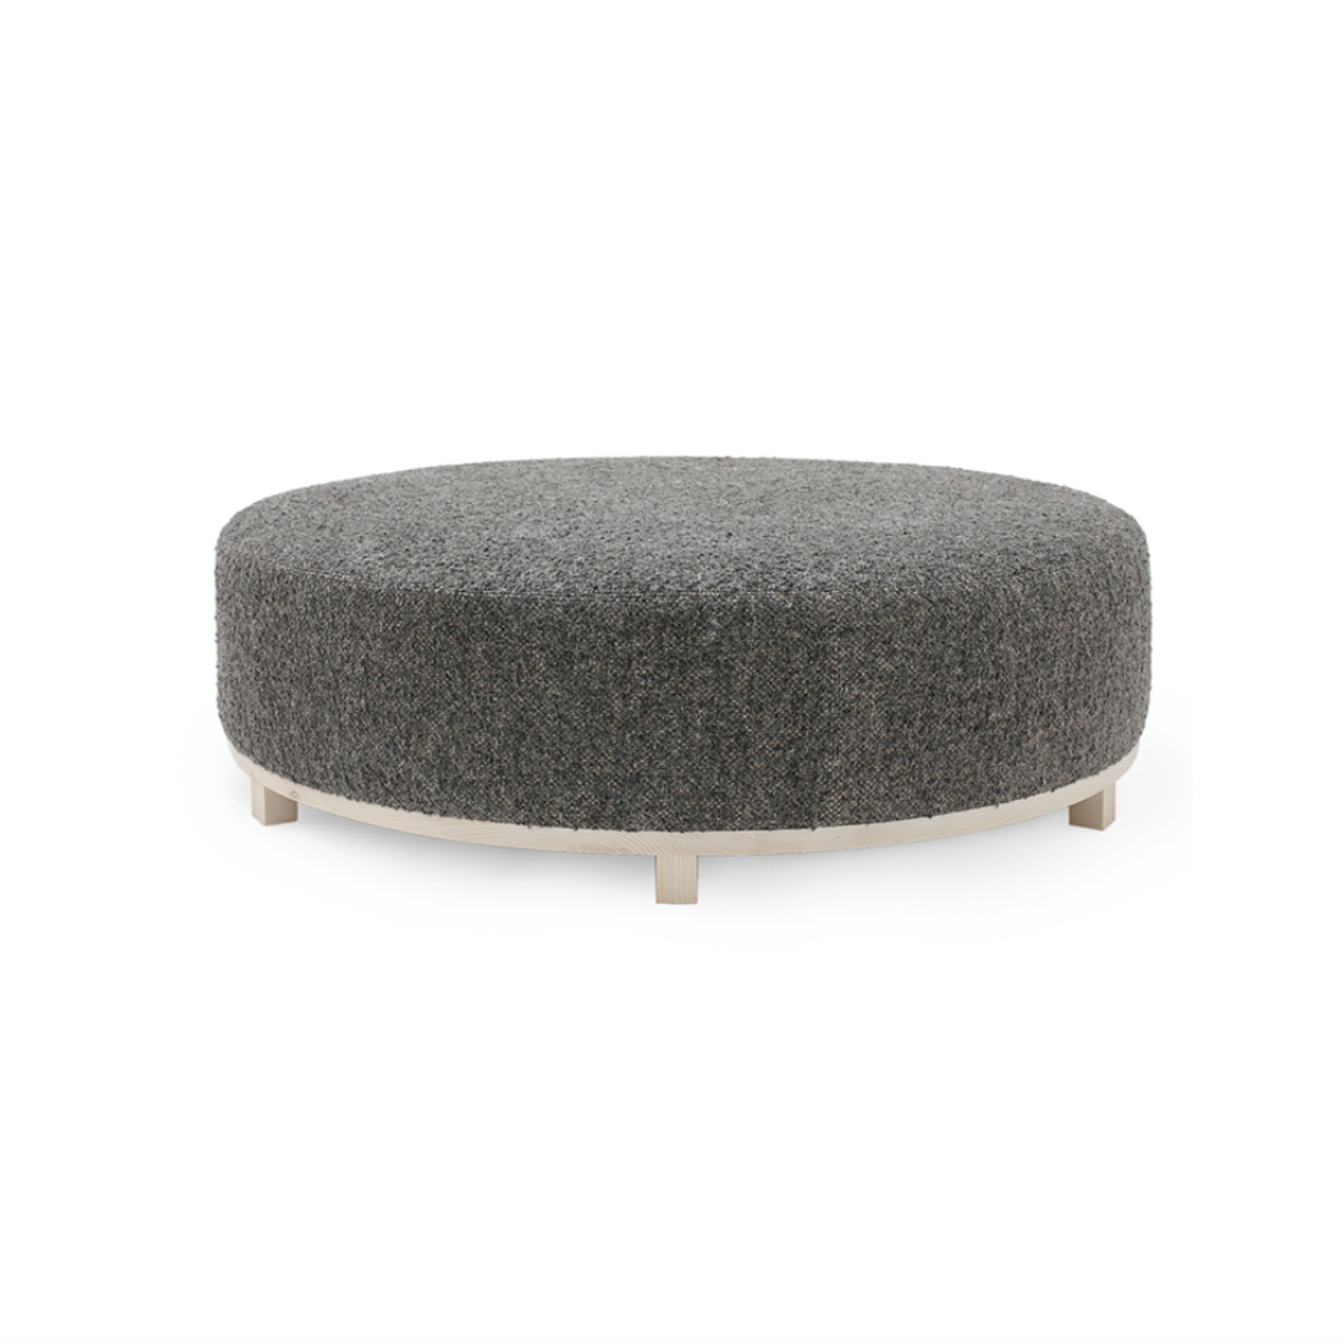 The Elliot Ottoman by Verellen is beautifully shaped and perfect for placing your favorite tray atop or relaxing on after a long day. This is bench-crafted with a sustainably harvested hardwood frame in Verellen's North Carolina atelier. It comes standard with:  • Foam and Fiber Seat Construction • Double Needle • Fabric Covered Ball Button on Top • Available Upholstered Base • Upholstered Only